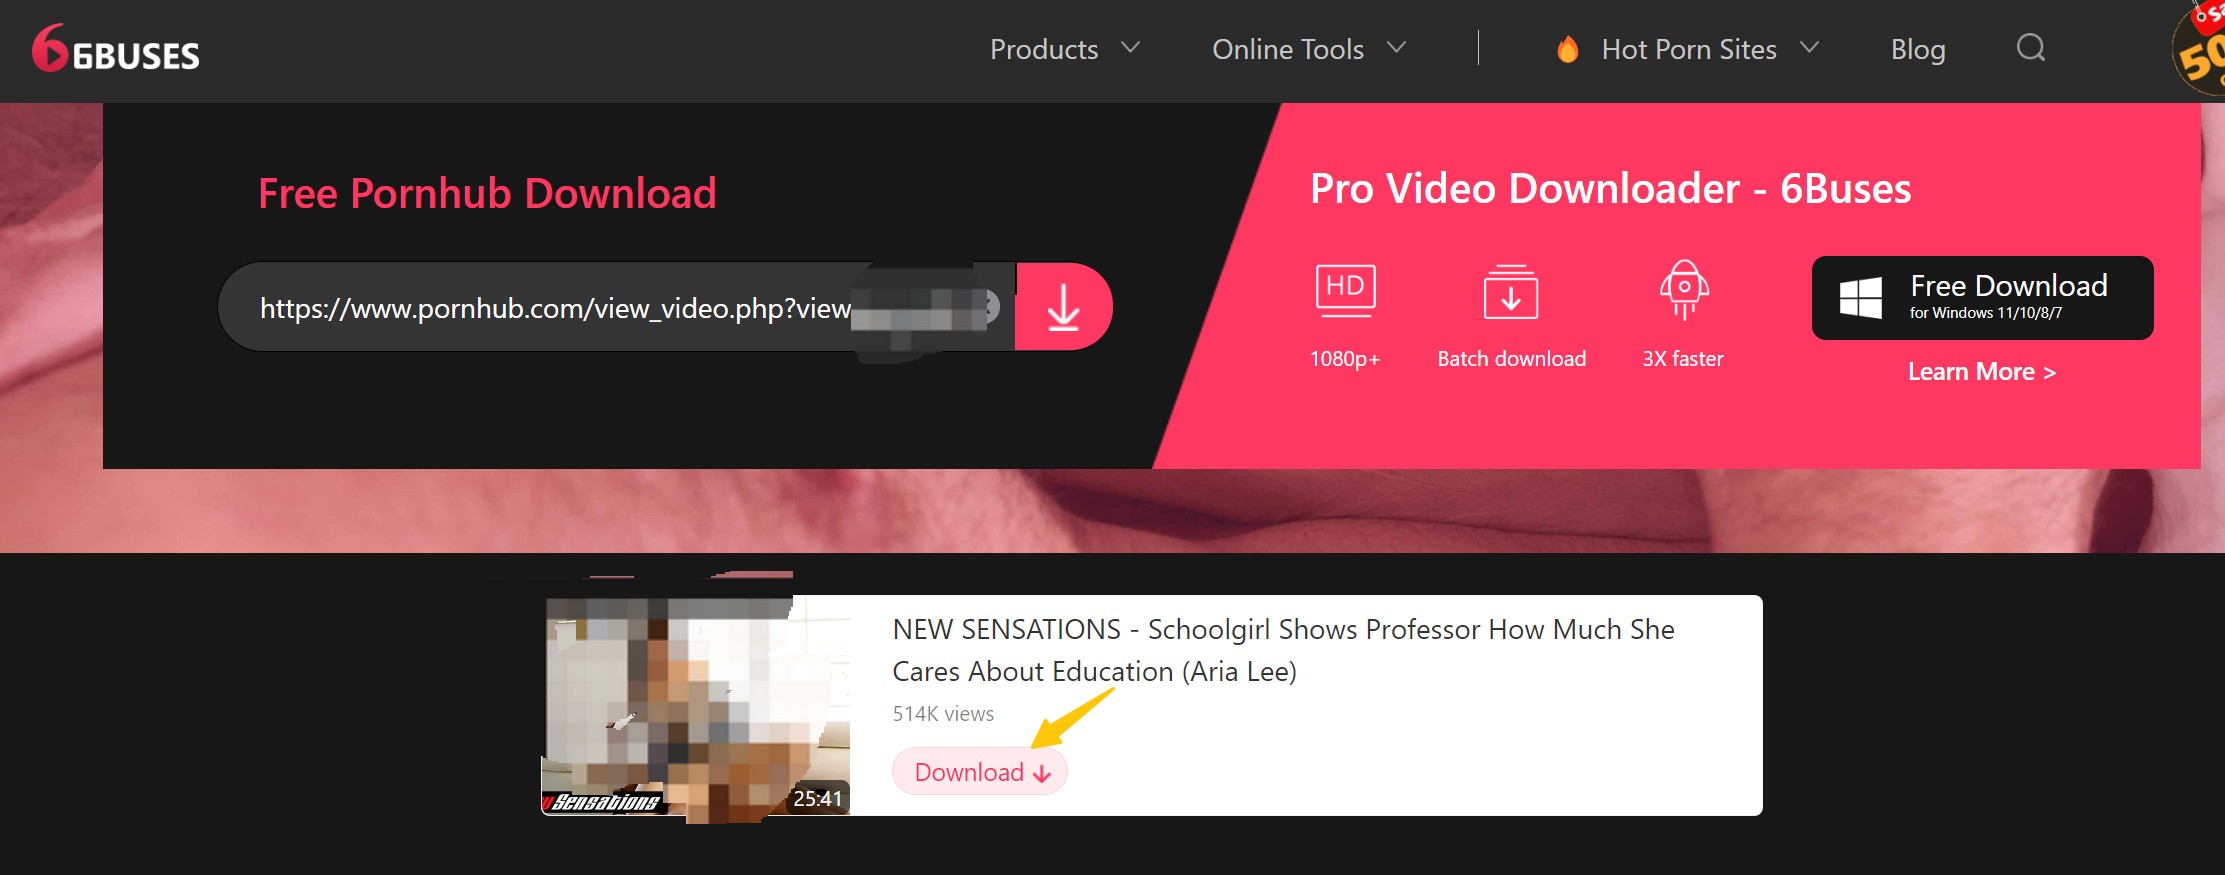 diah noviyanti recommends free download from pornhub pic